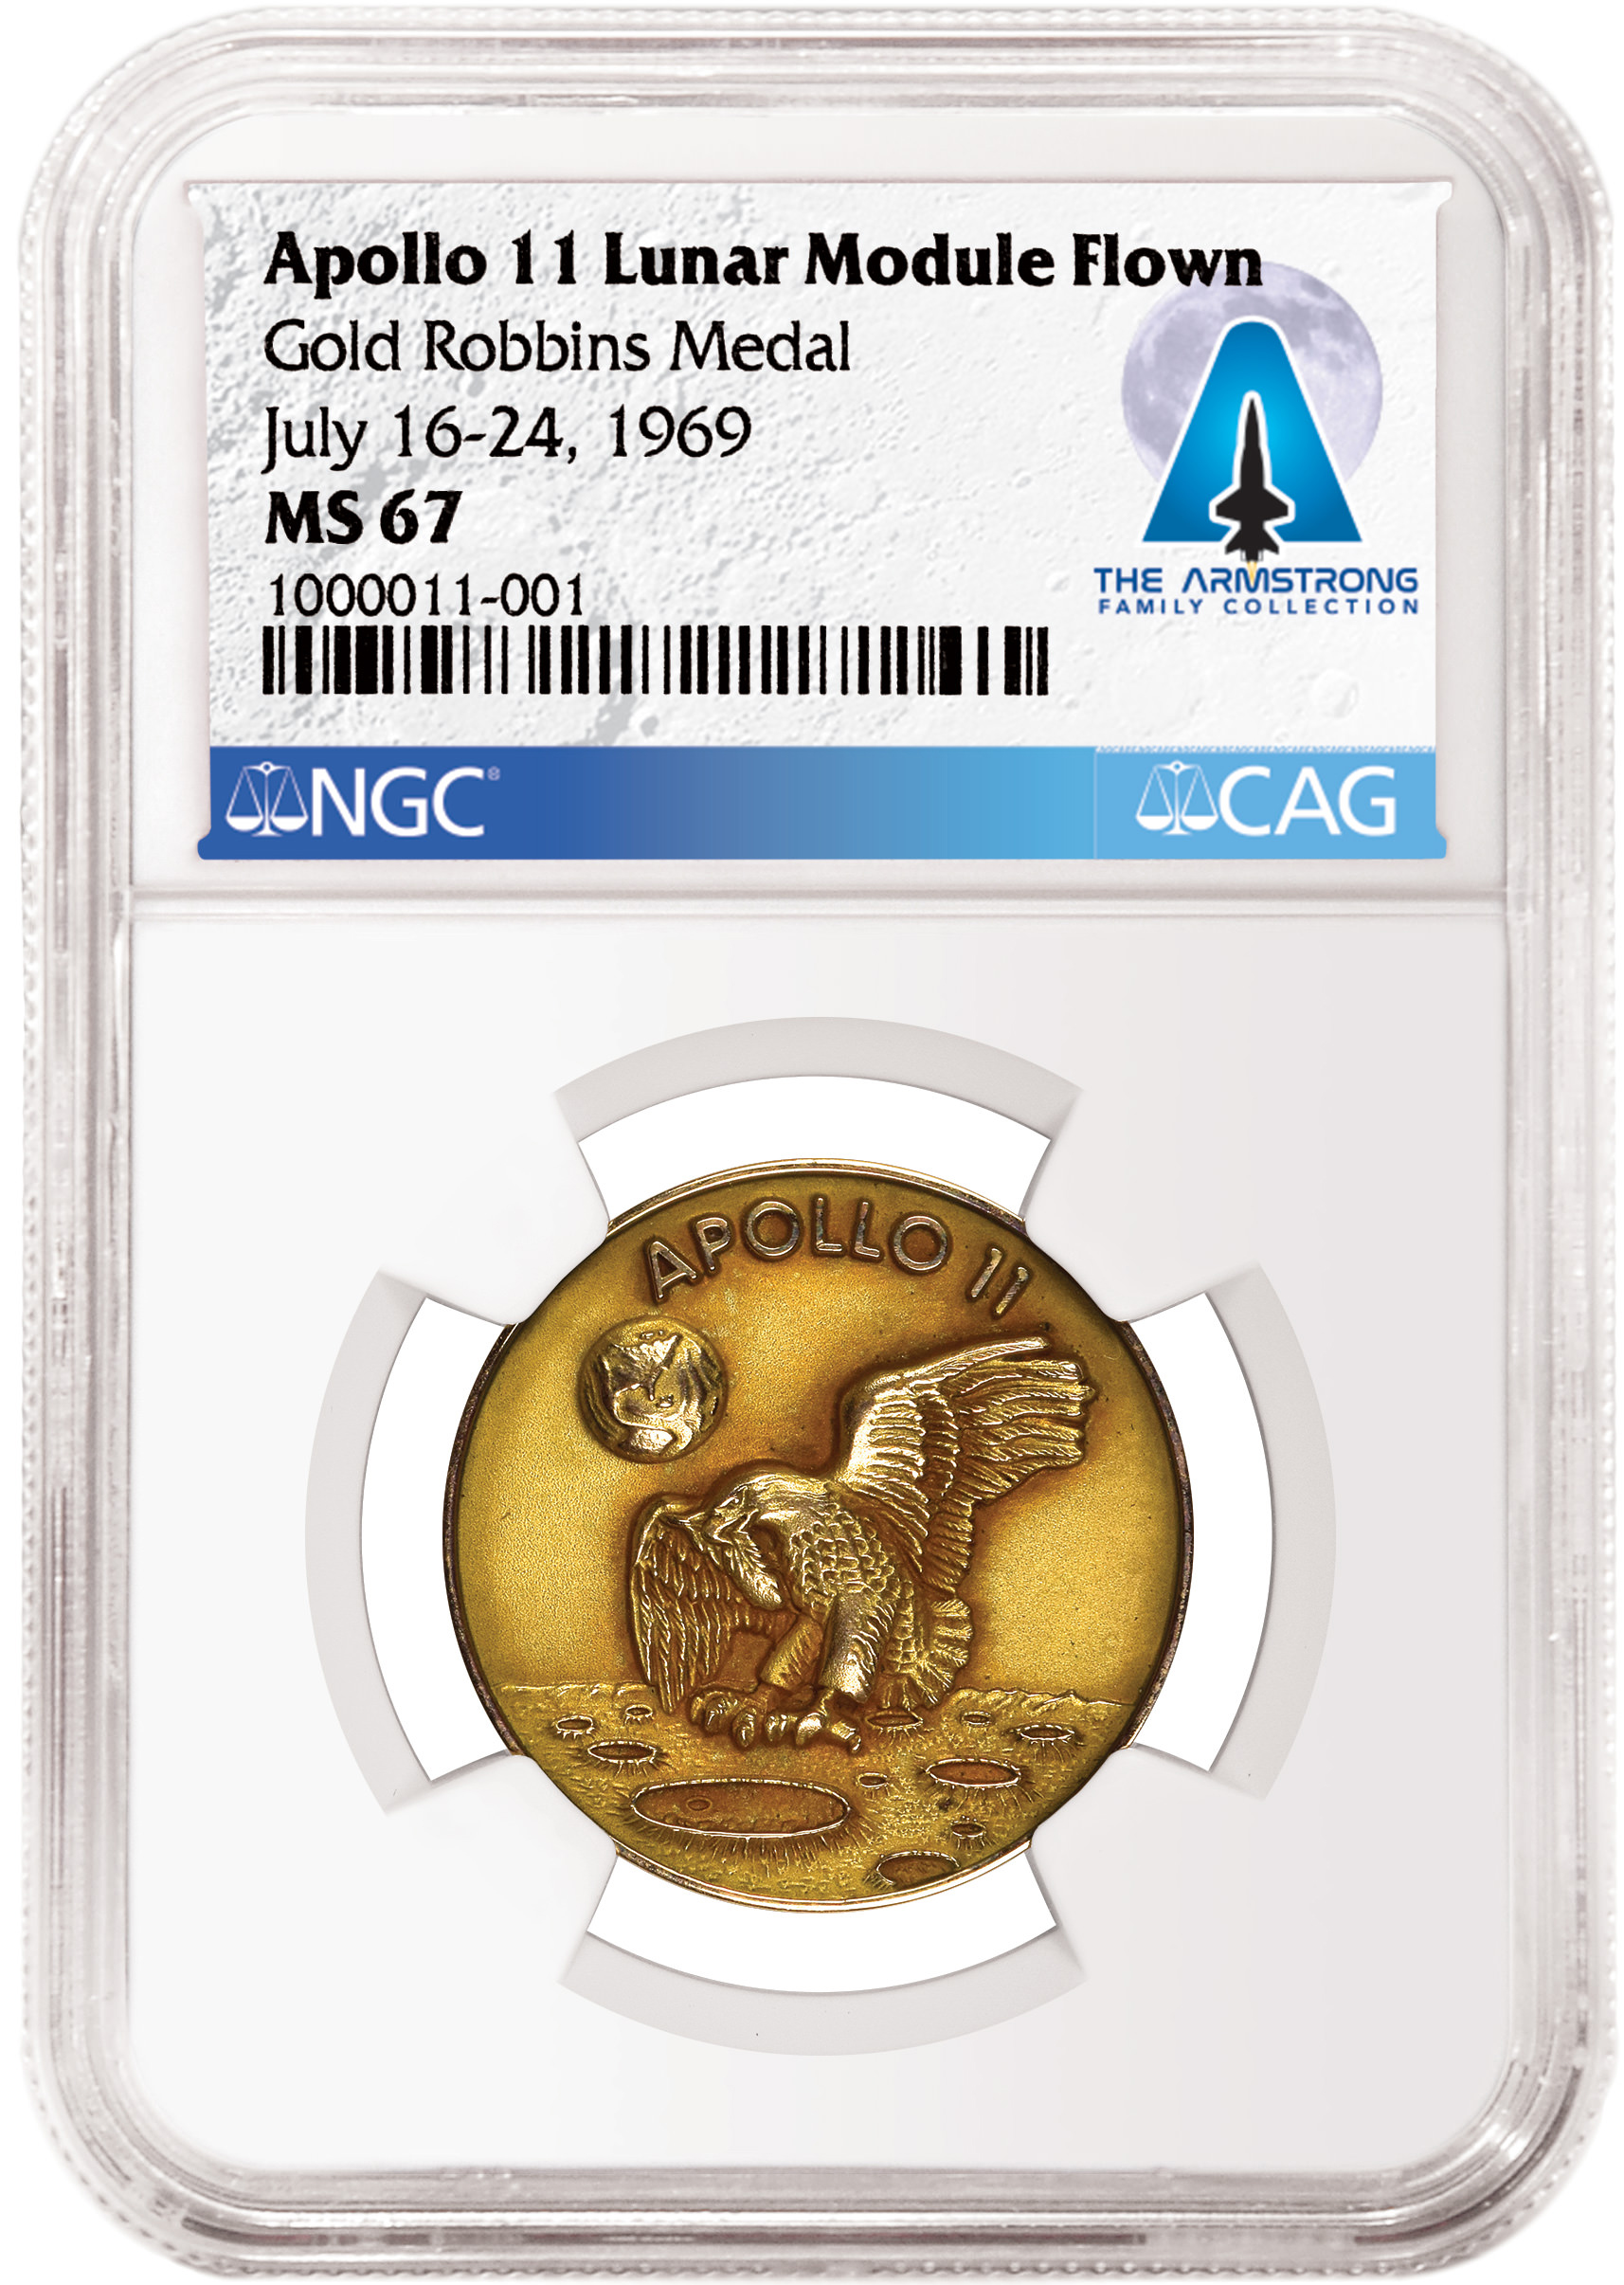 enlarged image for Press Release: Extremely Rare Apollo 11-Flown Gold Robbins Medal,  Certified by CAG and NGC,  Highlights Third Armstrong Family Collection Sale